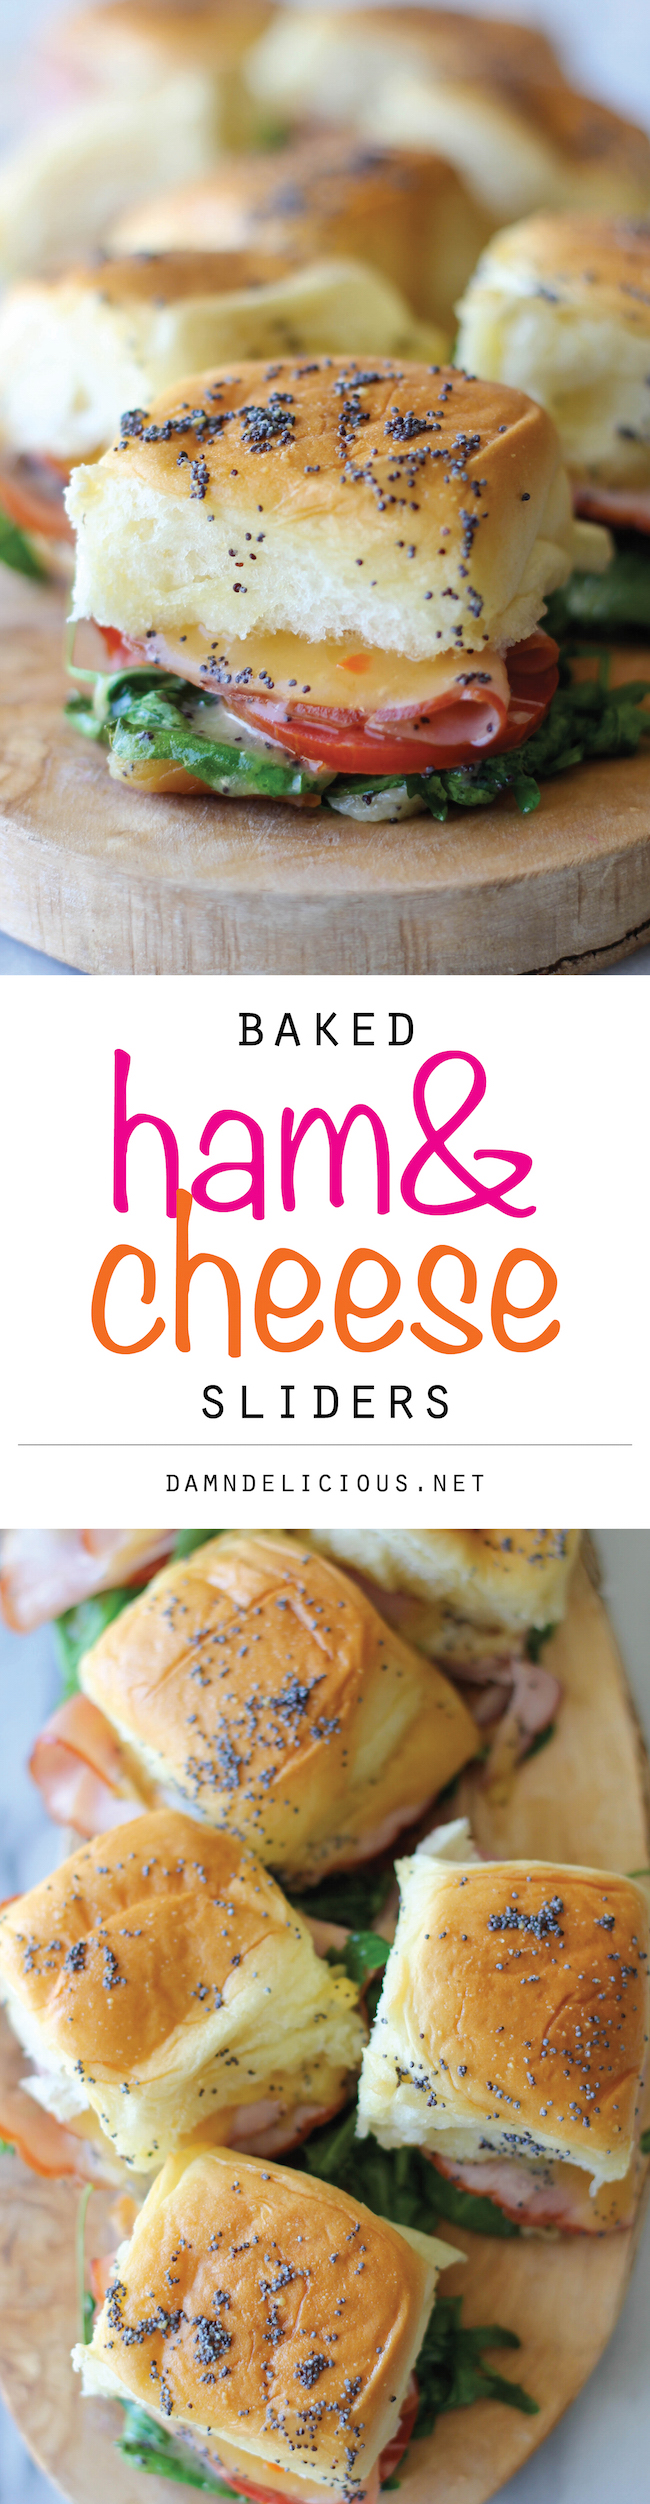 Baked Ham and Cheese Sliders - These sliders are popped in the oven until they're completely buttery and oozing with melted cheese!